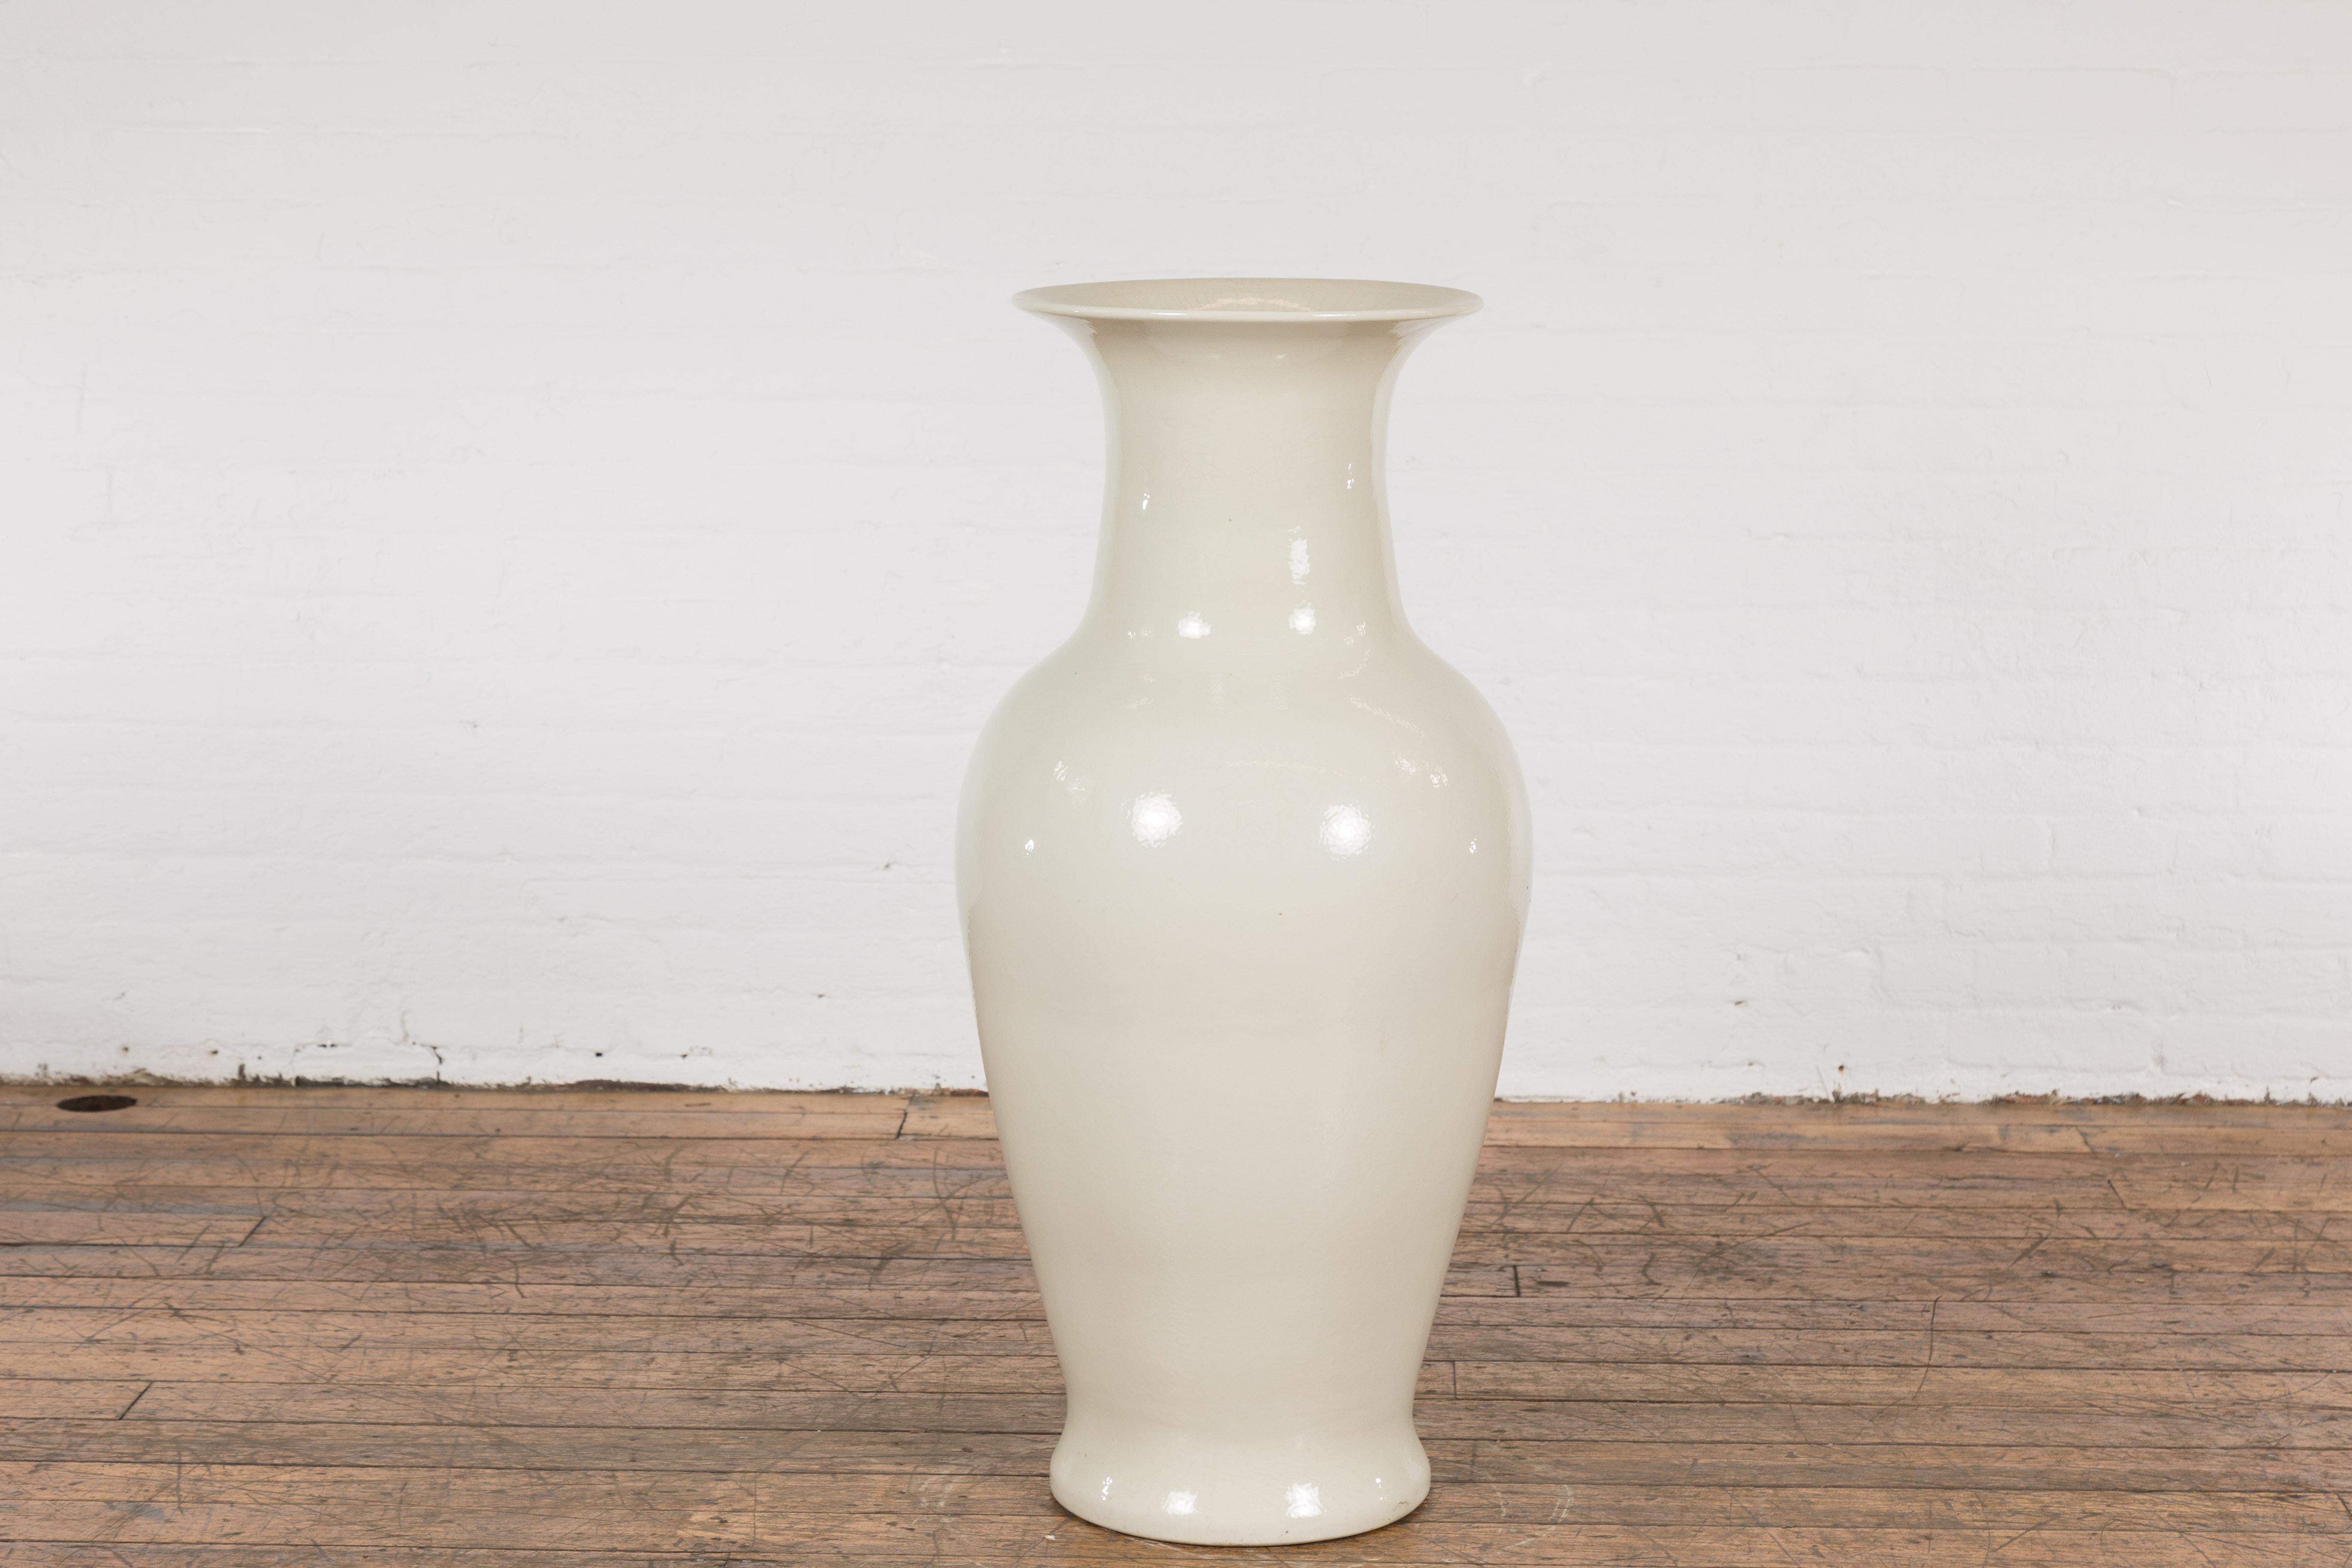 An oversized Chinese vintage blanc de Chine altar vase from the mid 20th century, with discreet crackle finish and flaring neck. Created in China during the midcentury period, this large vase features a tall neck supporting a flaring neck (with a